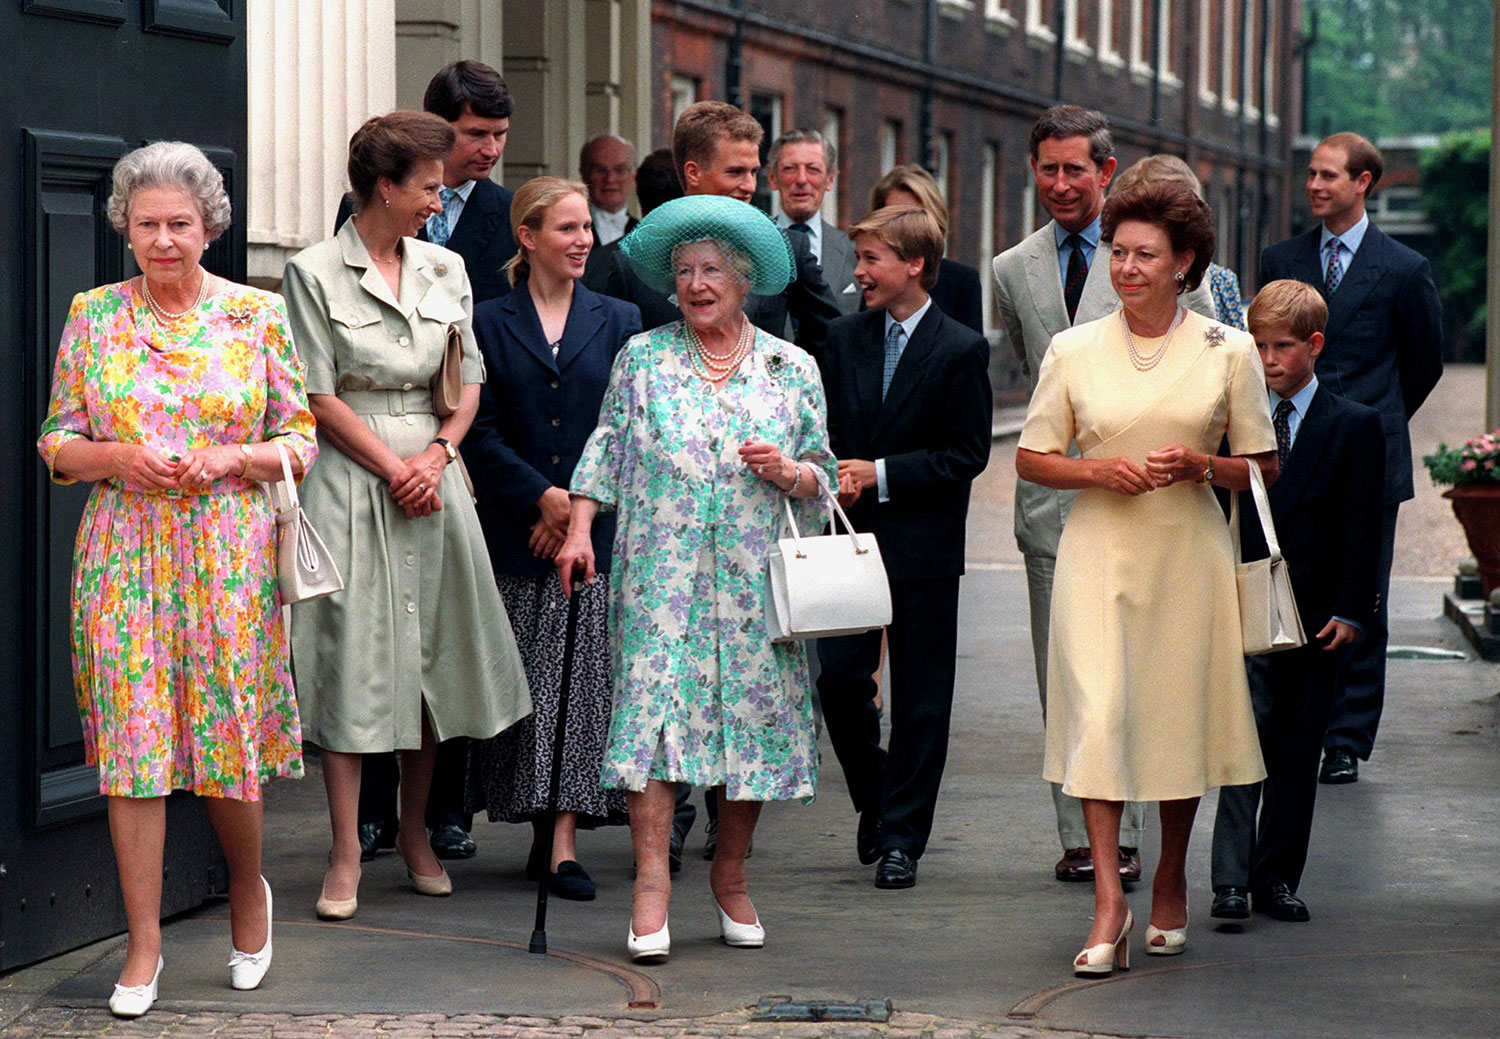 The Queen Mother with her family outside Clarence House on her 94th birthday, London, August 4, 1994.